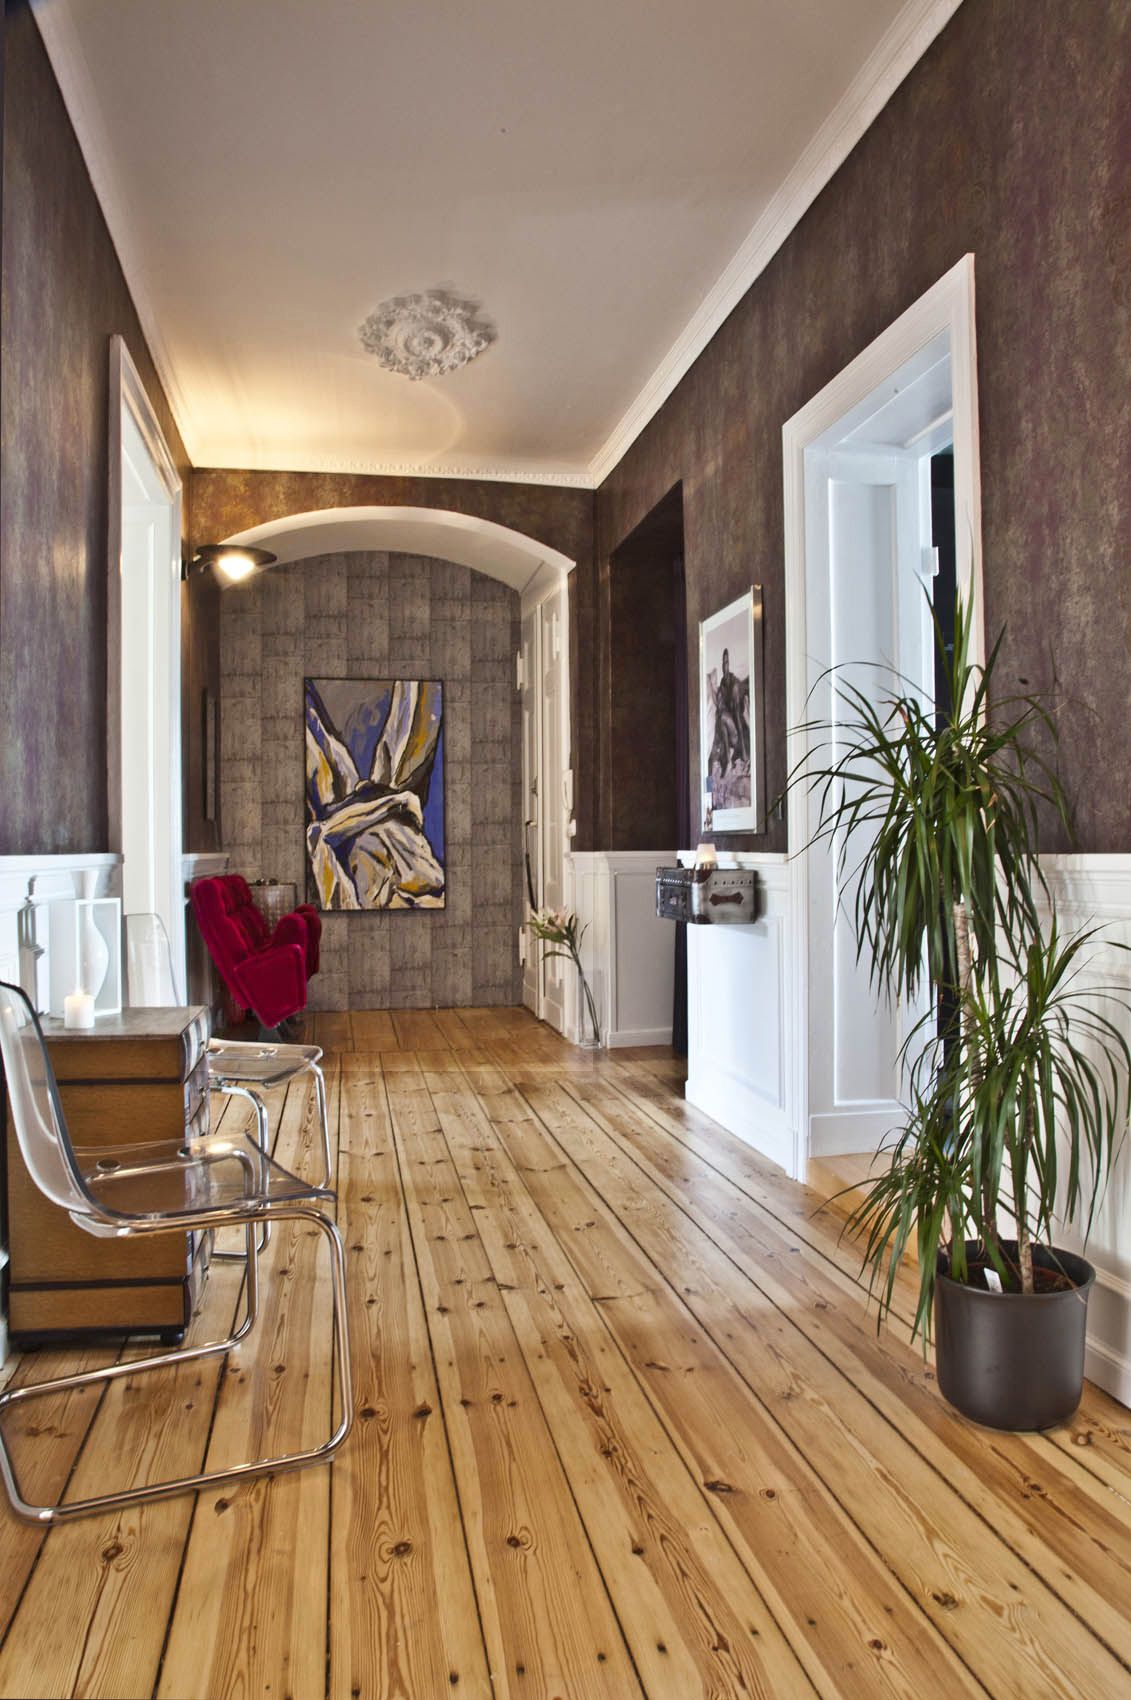 Stylish & Spacious (for 2-3 months). Amazing Designer Home in Mitte-Tiergarten. With Cleaning Service.